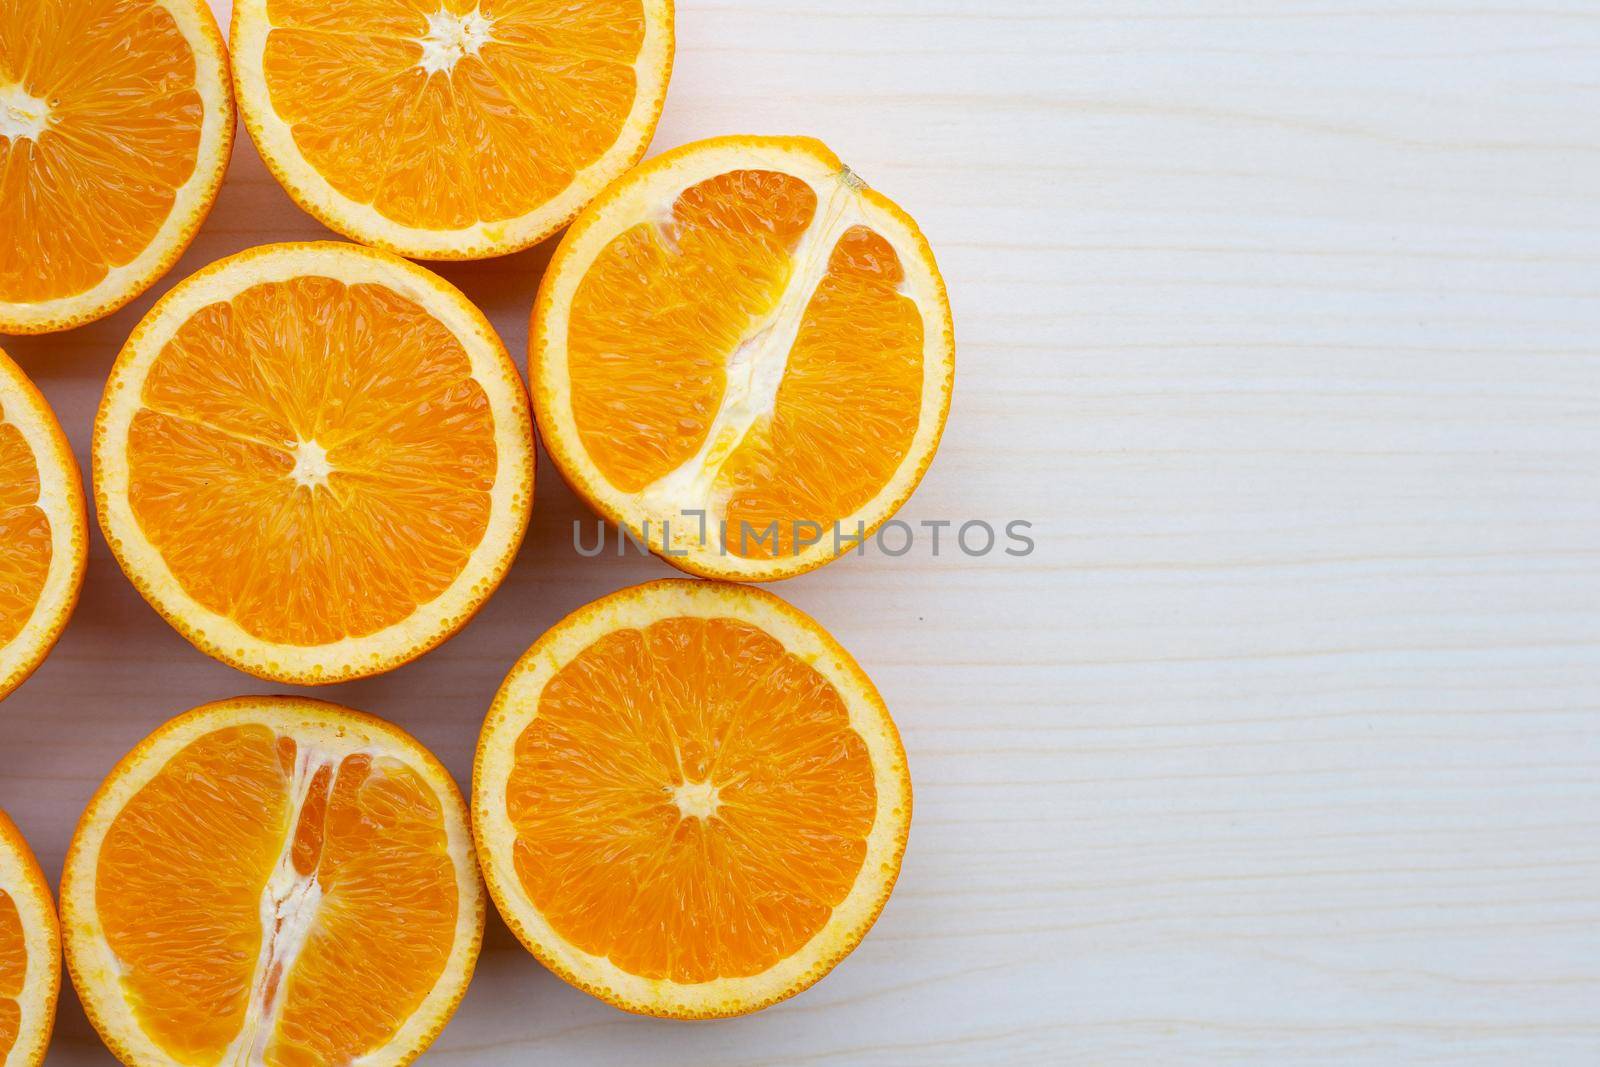 Sliced oranges on table background. High vitamin C, Juicy and sweet.